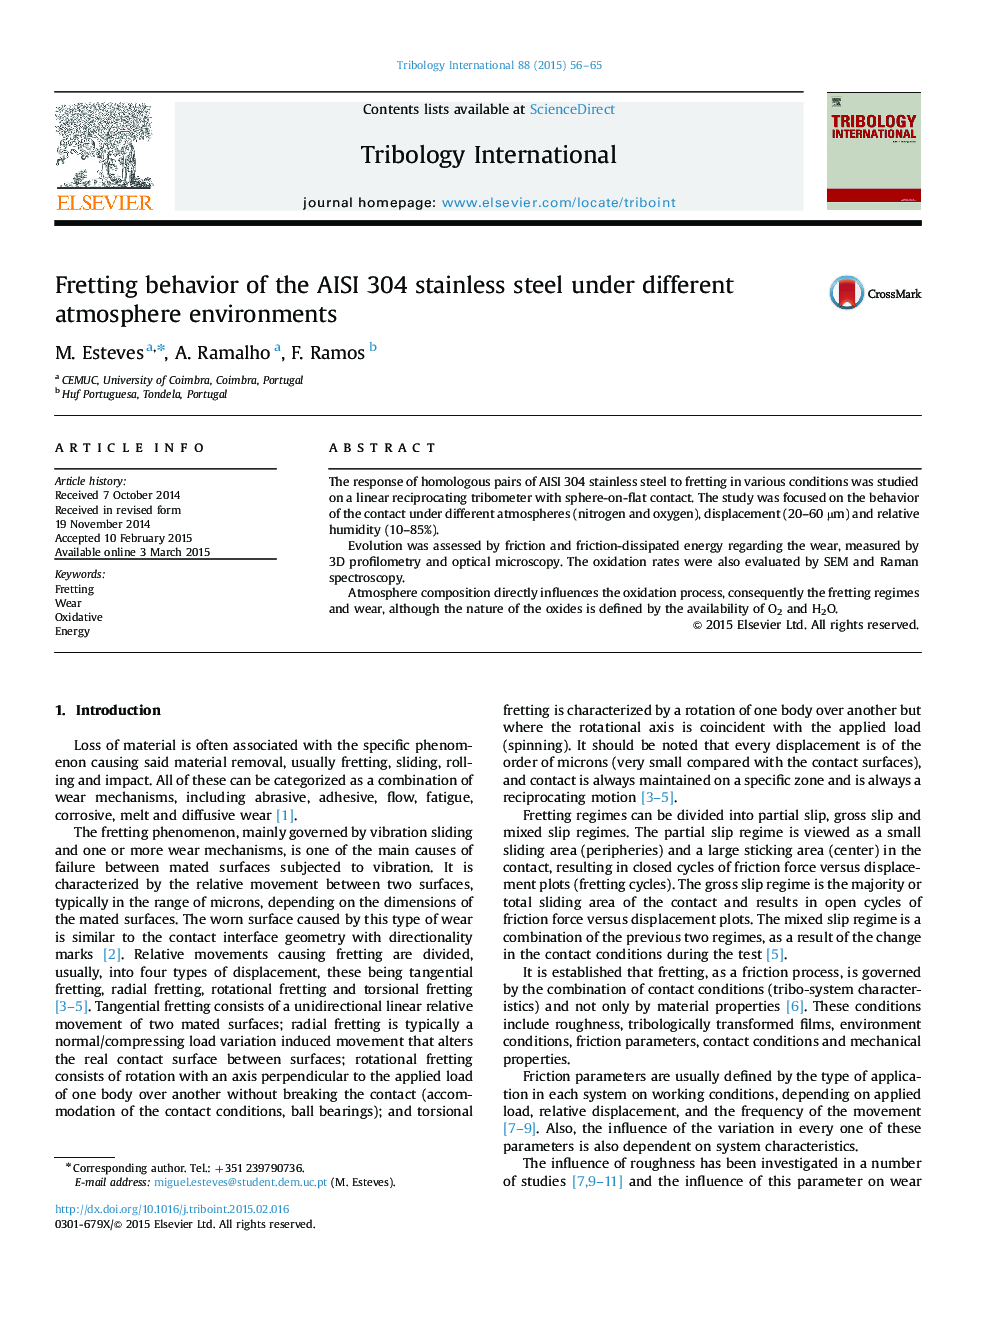 Fretting behavior of the AISI 304 stainless steel under different atmosphere environments